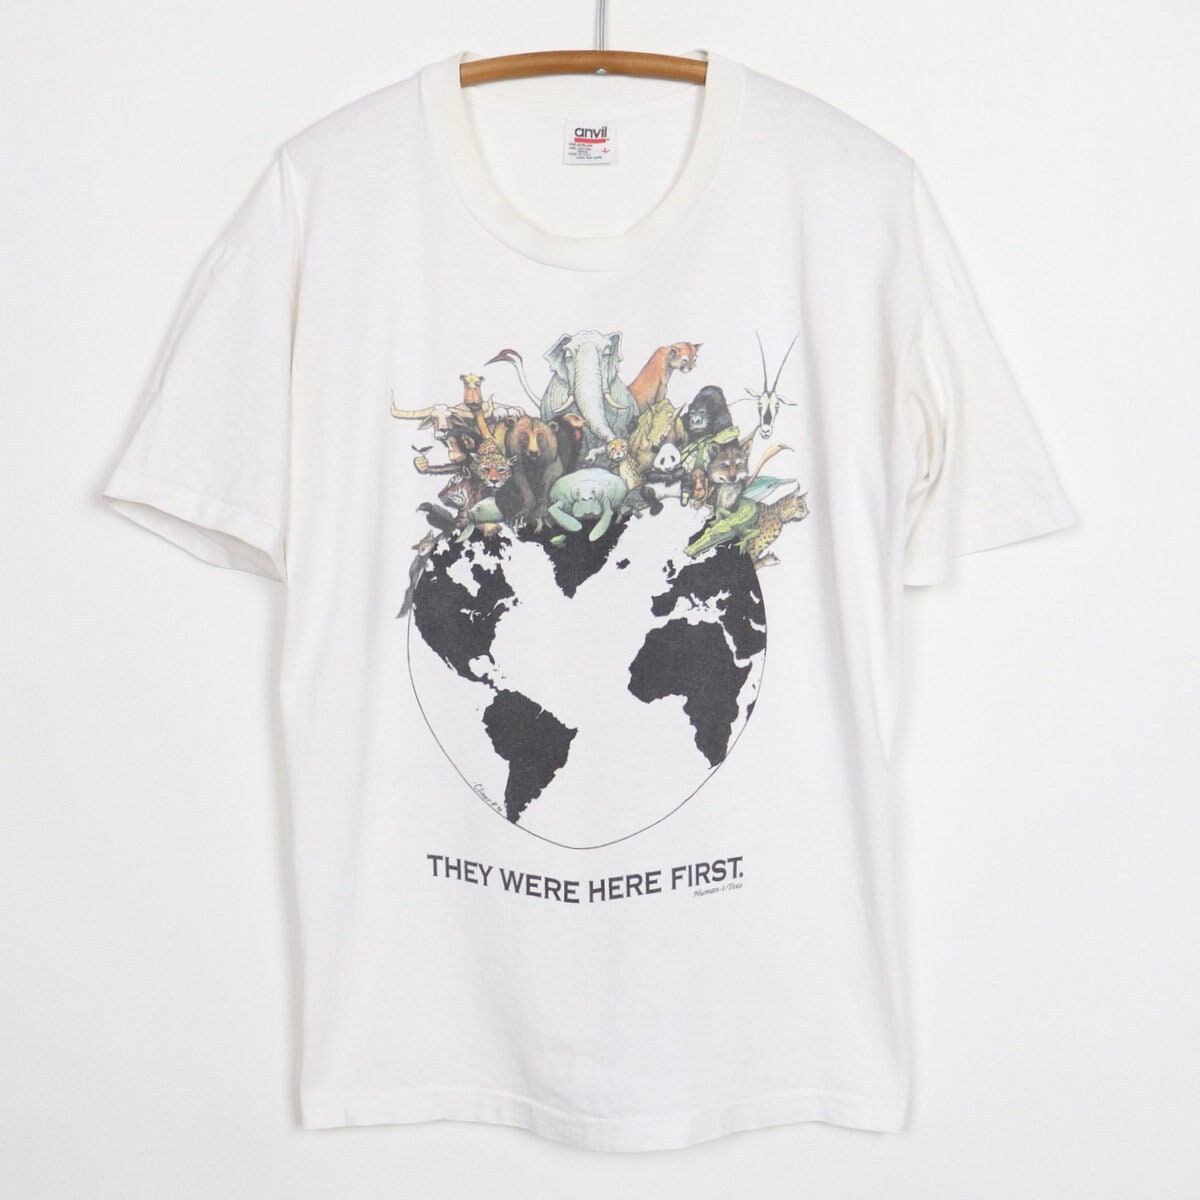 Showcase Your Style With 'They Were Here First' Tee